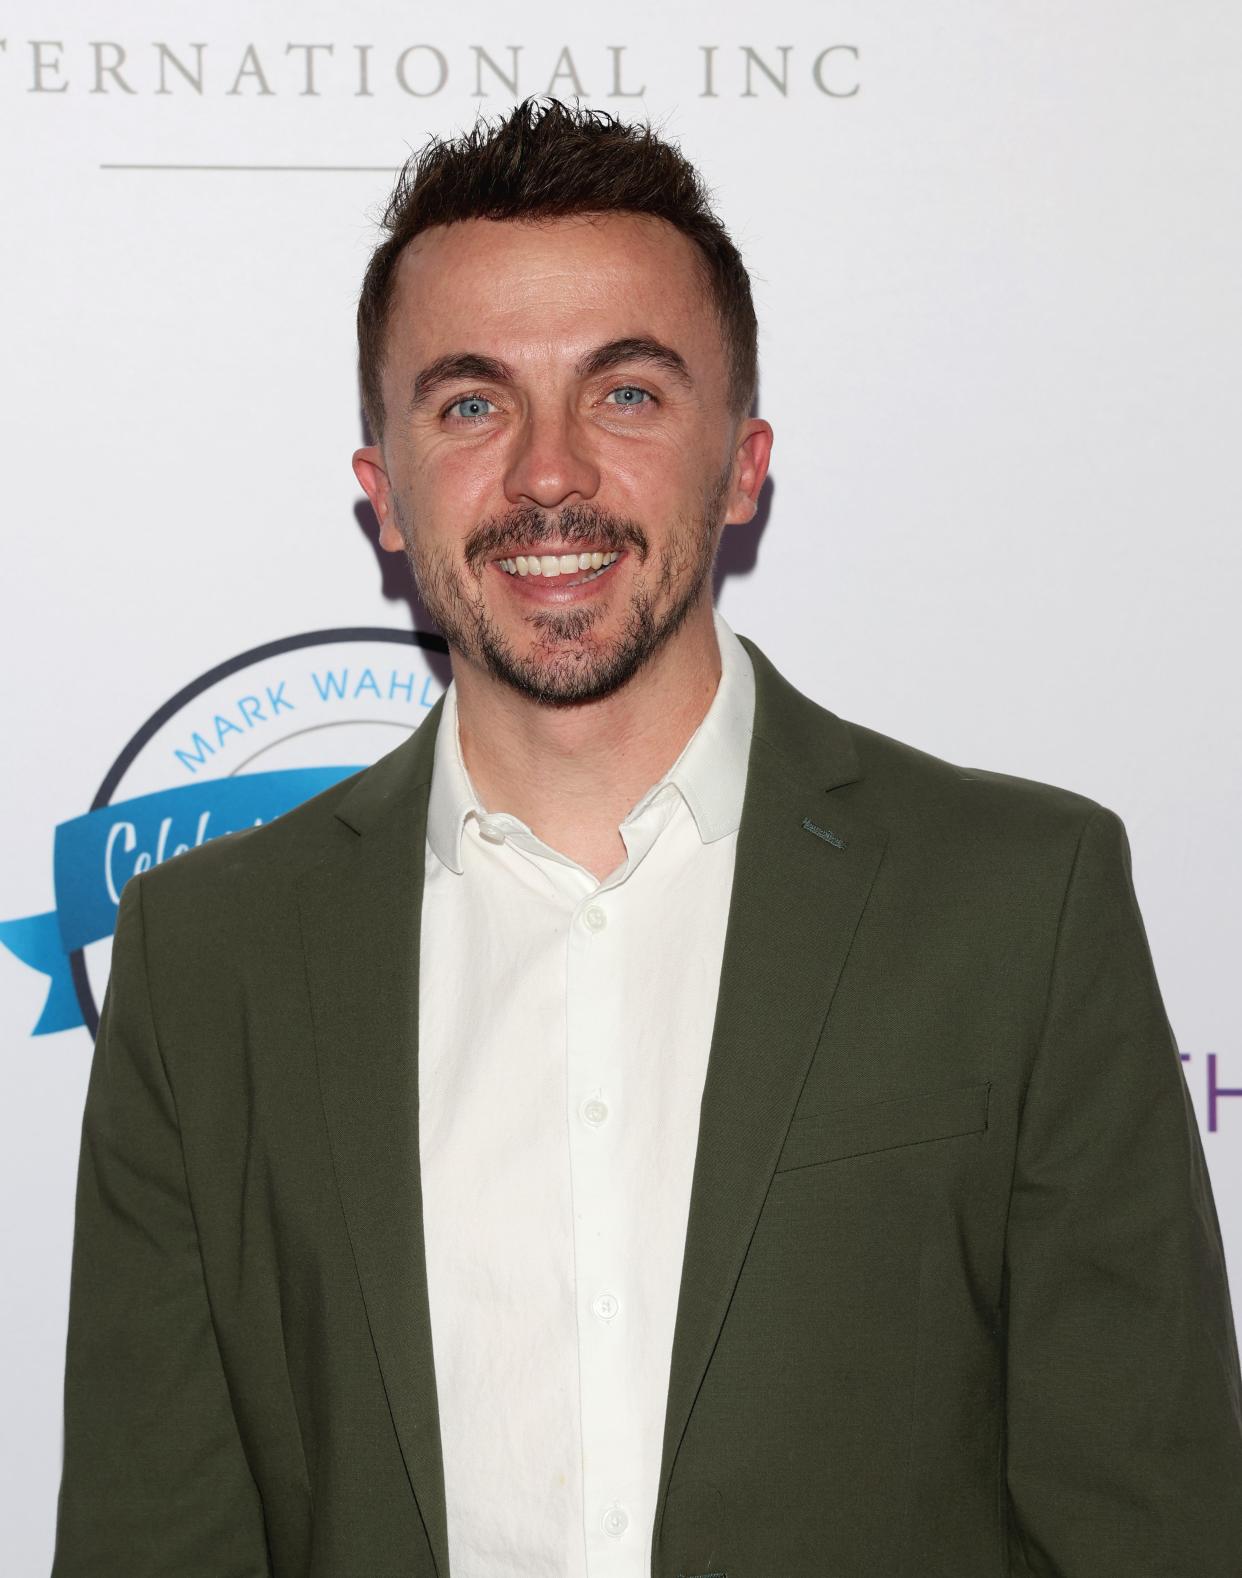 Frankie Muniz discussed why he would not allow his son to be an actor in a candid interview.